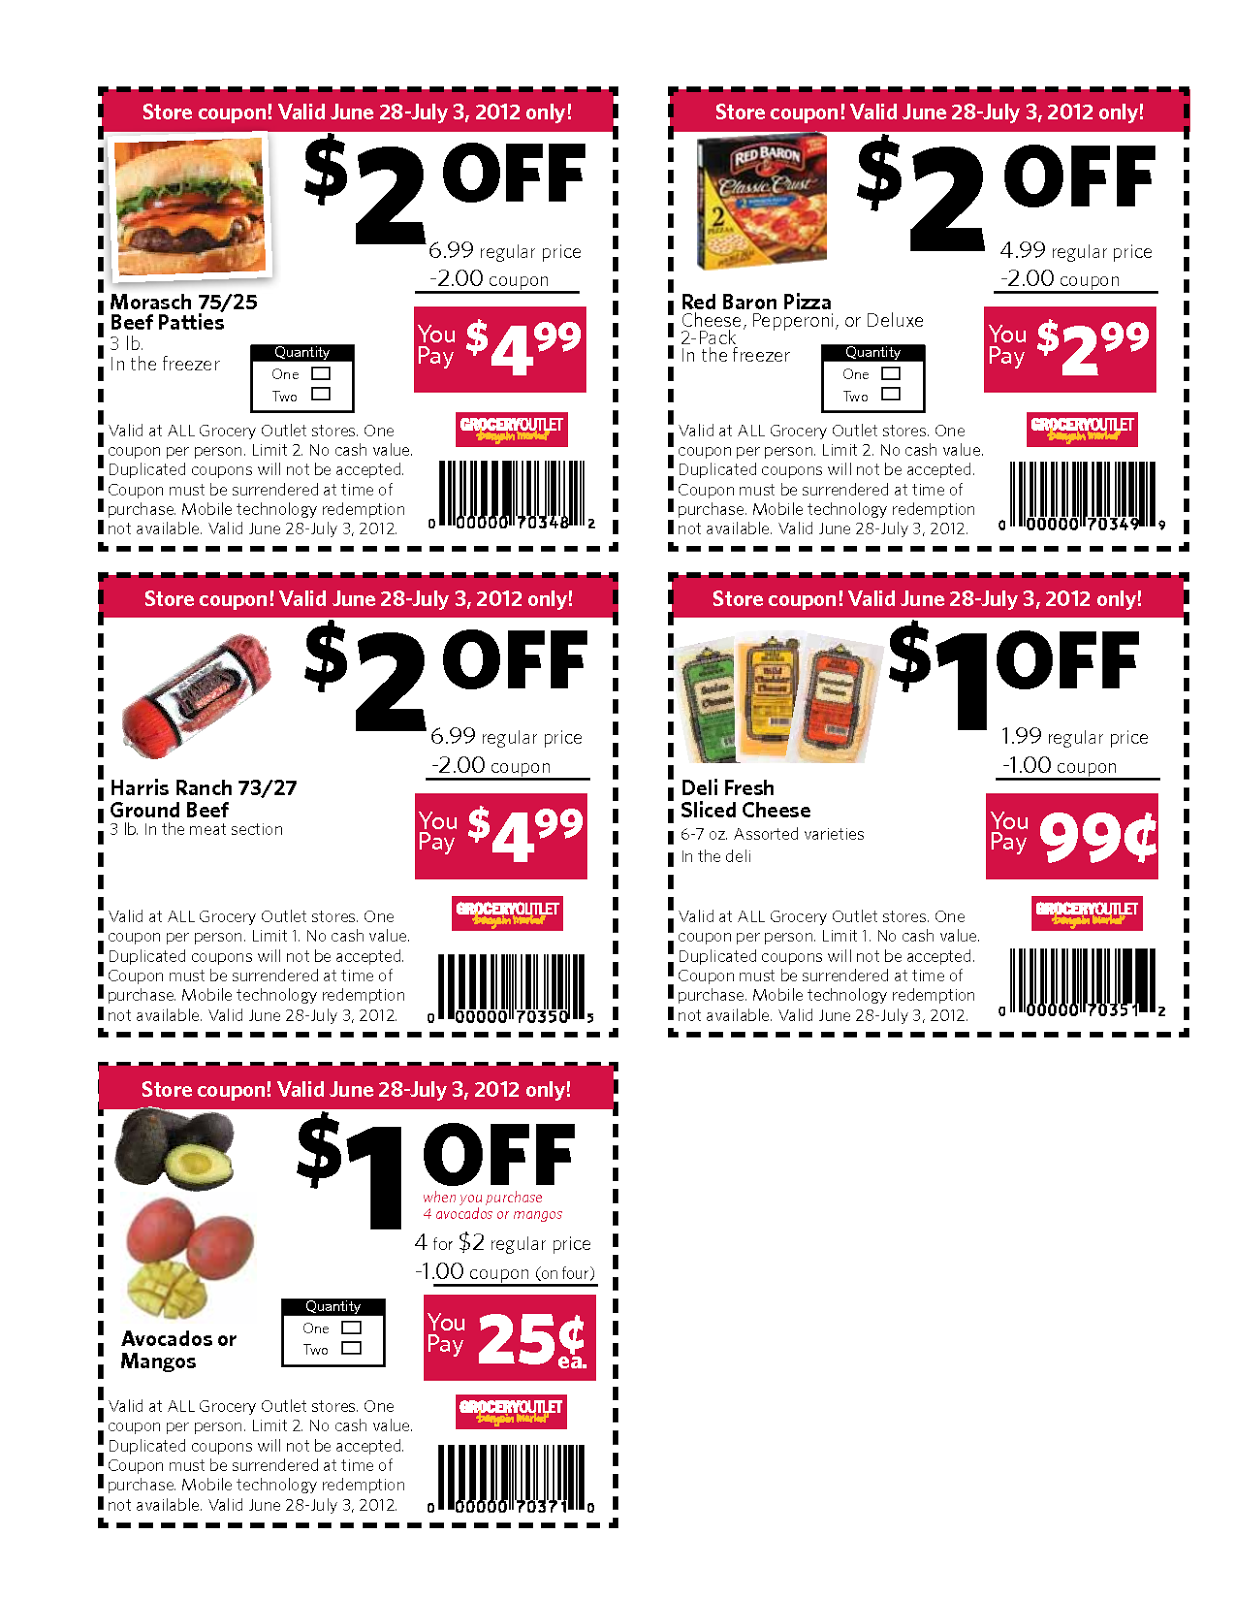 free-online-printable-grocery-store-coupons-printable-templates